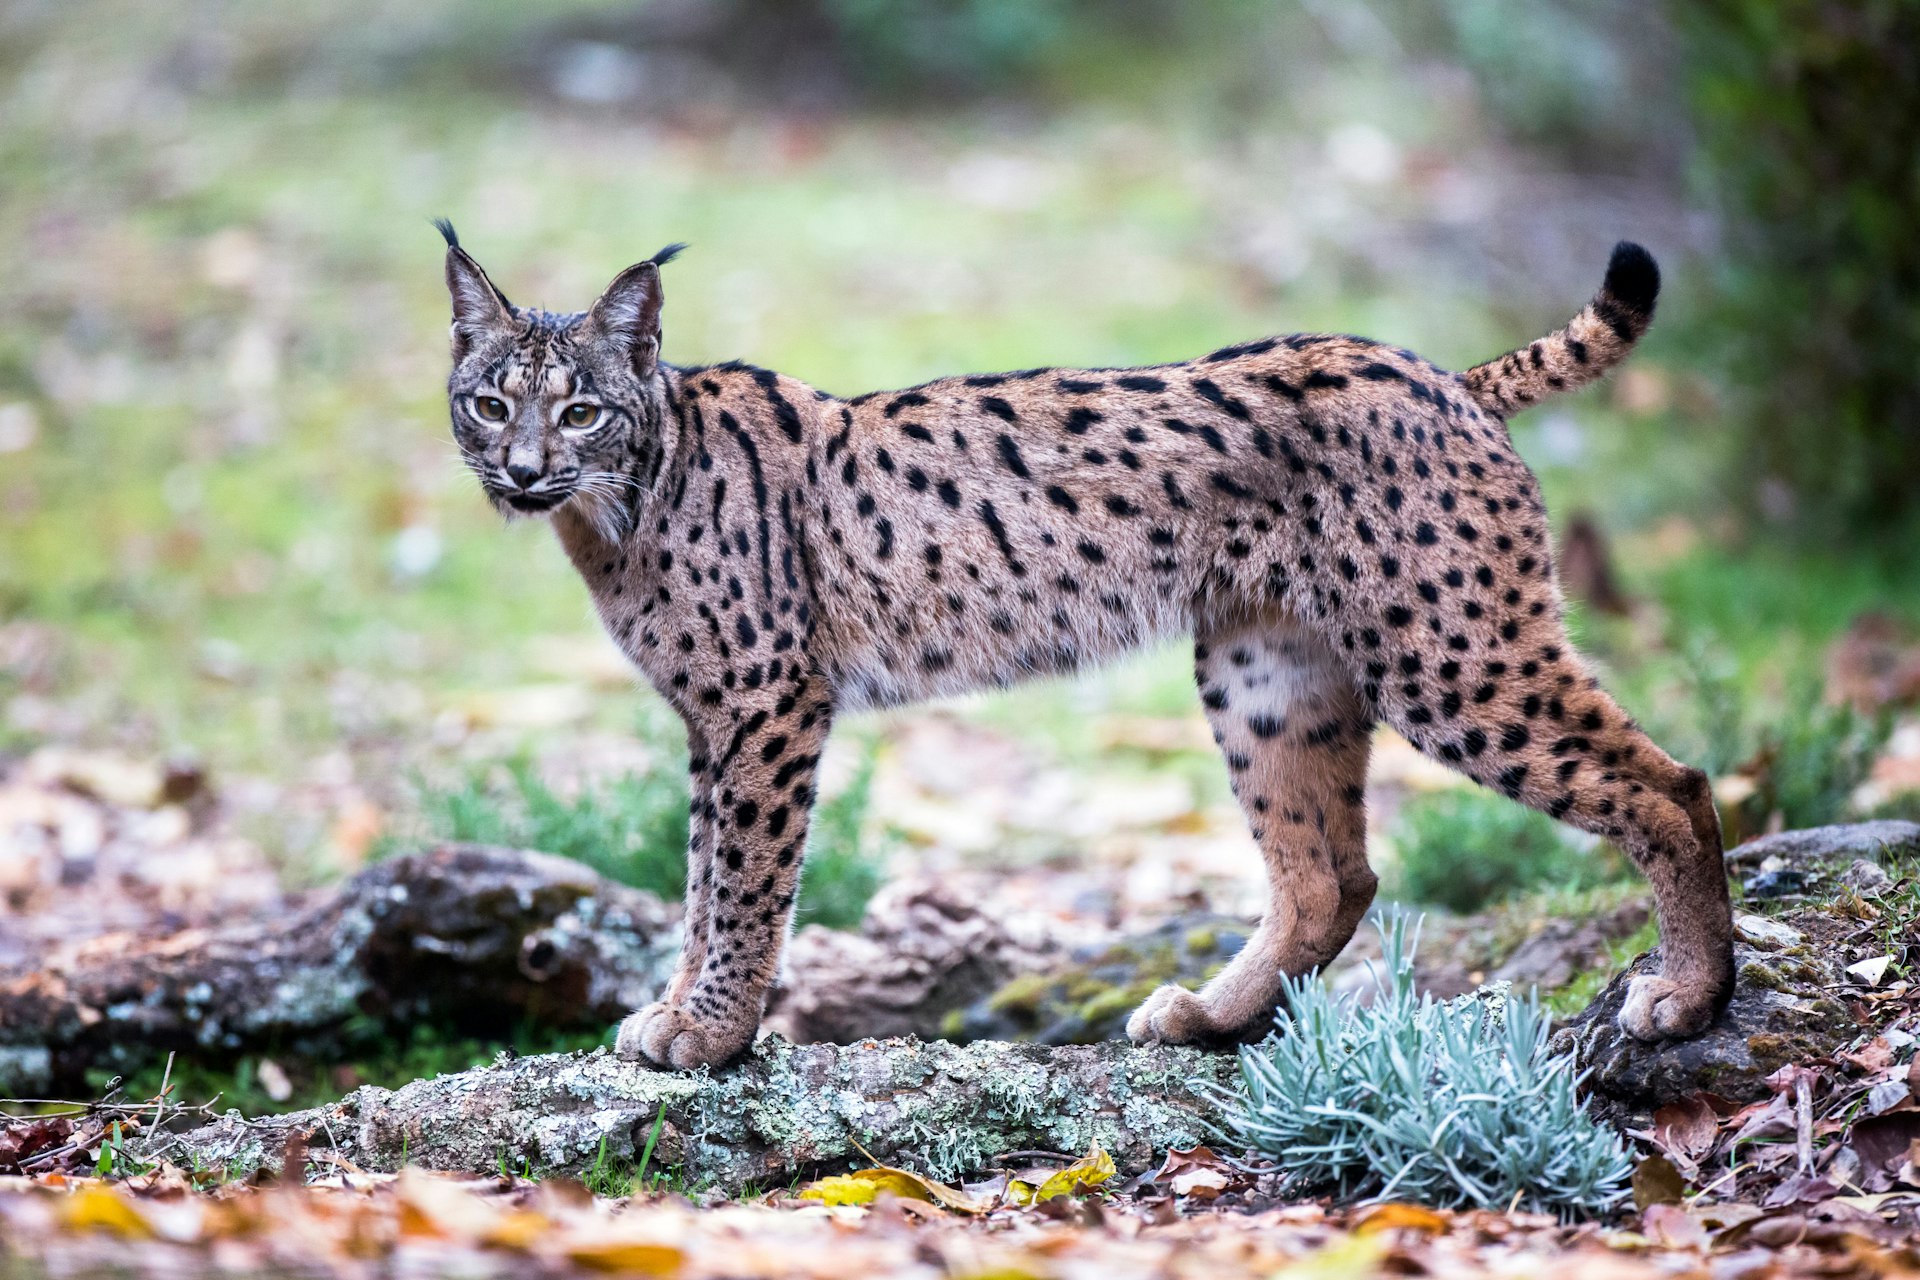 A large spotted cat with pointed ears in the wild